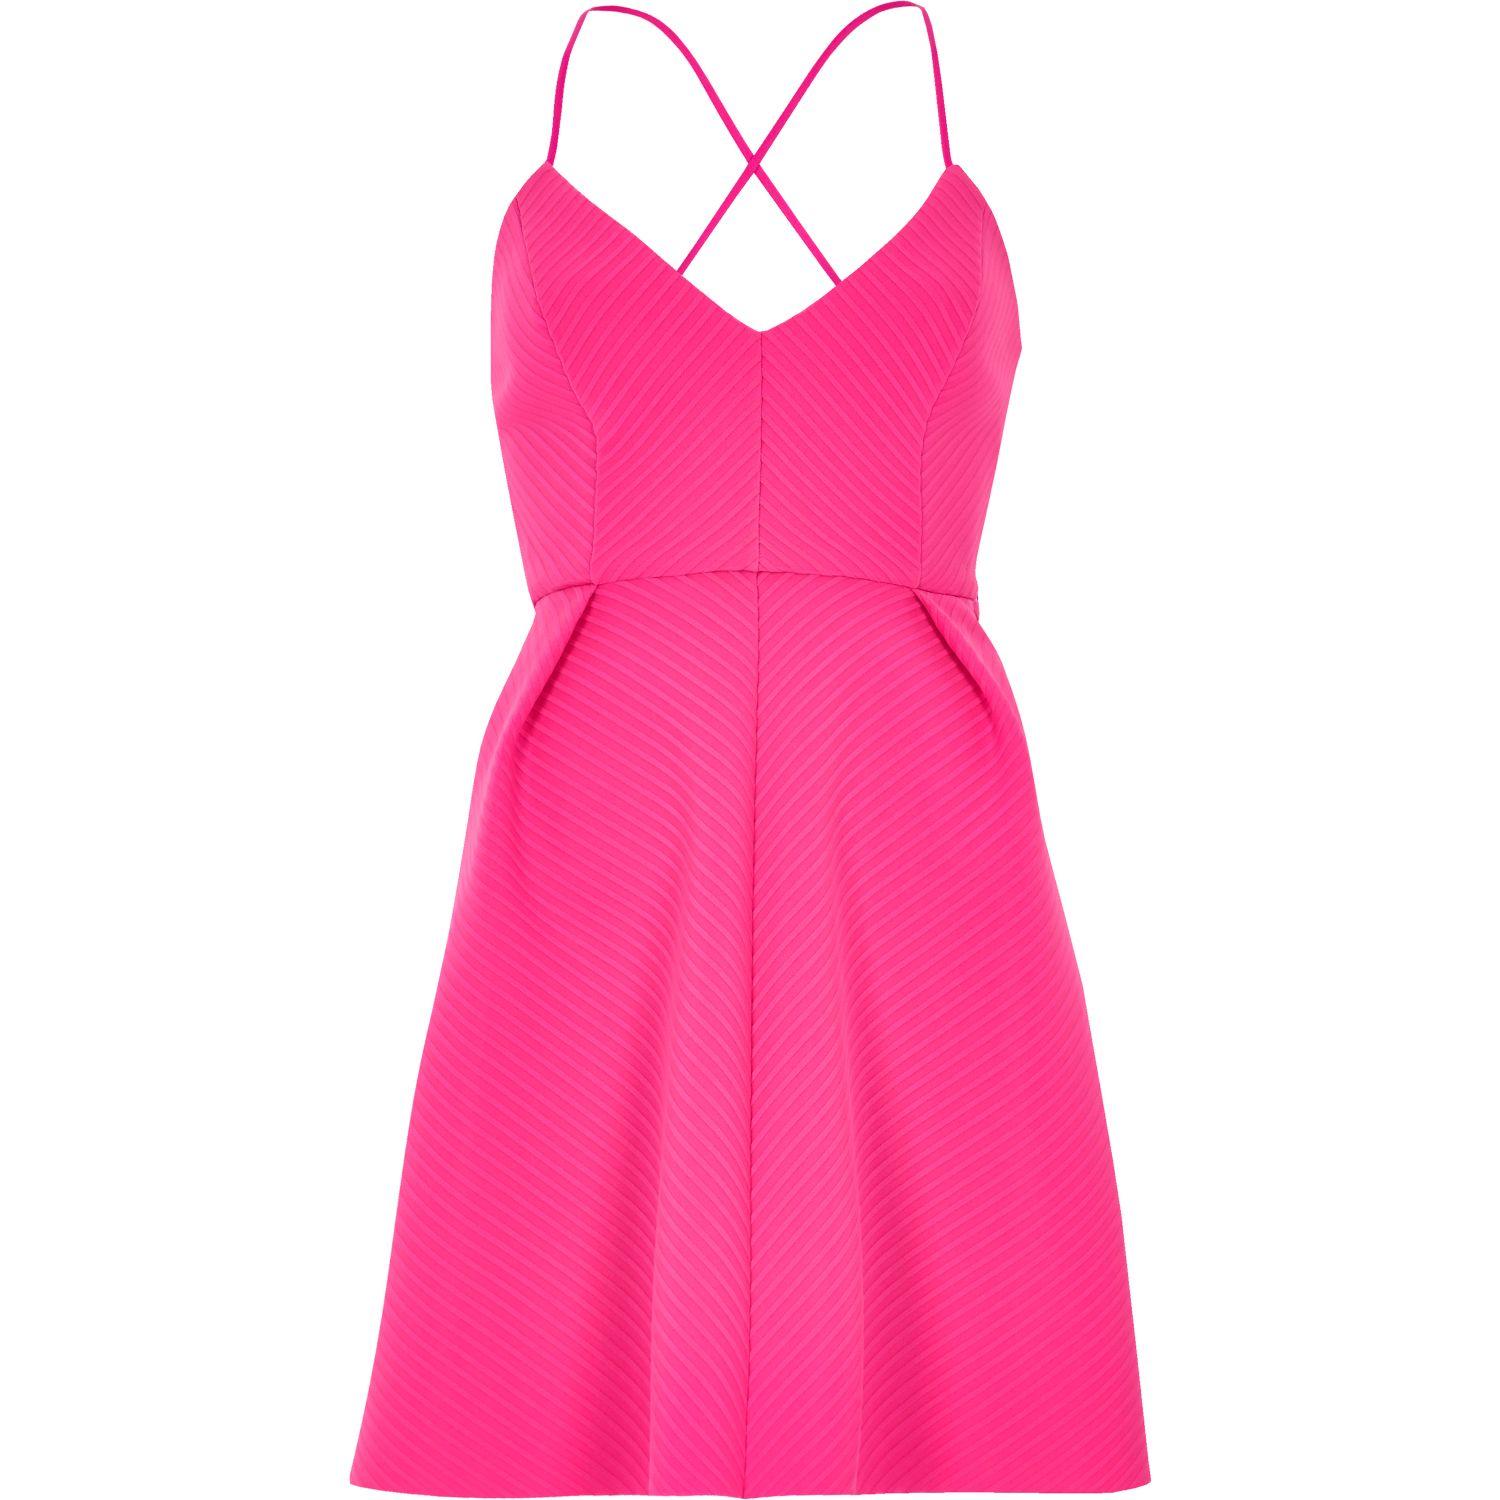 Lyst - River island Pink Strappy Skater Dress in Pink